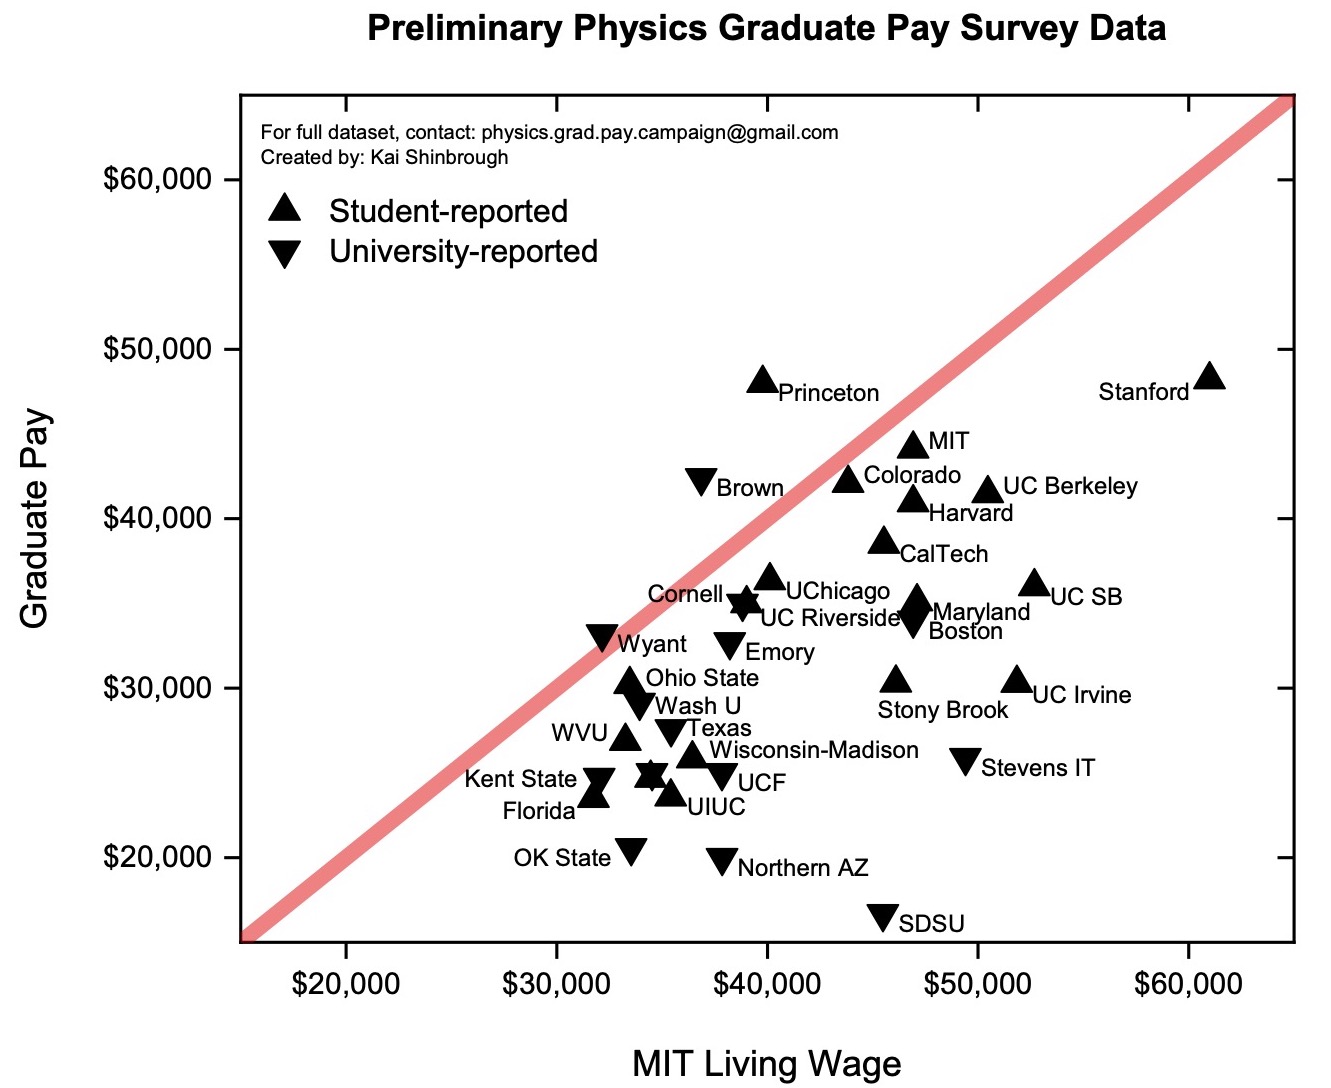 Scatter plot of student- and University-reported Physics graduate pay versus the MIT Living Wage for the city in which respondents live.